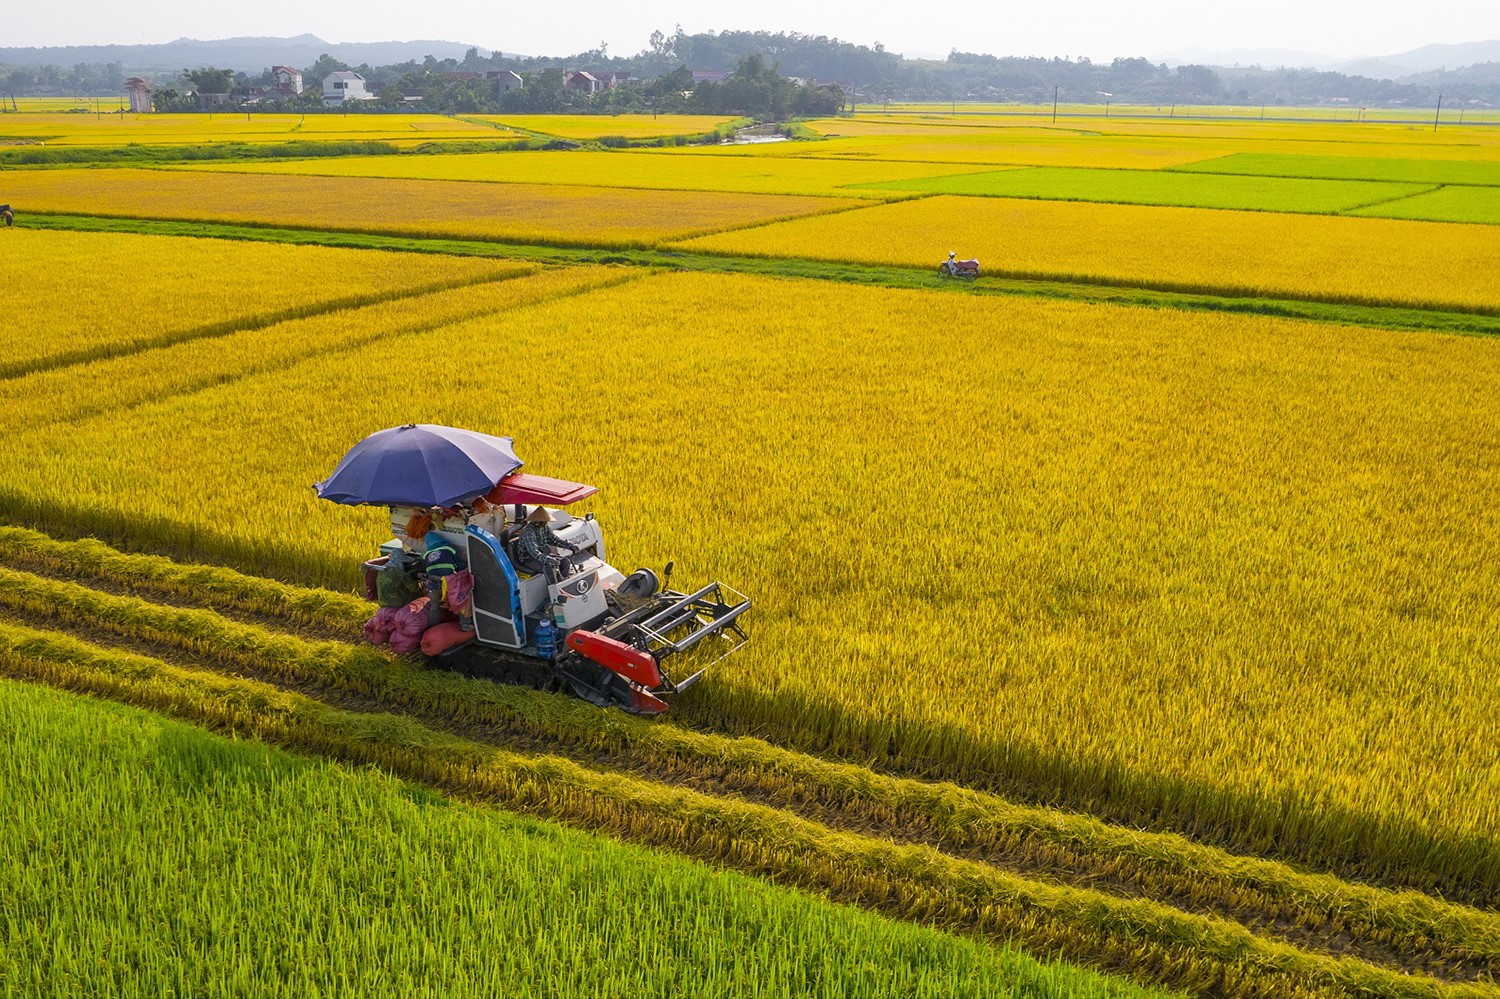 In the first seven months of the year, Vietnam produced more than 24 million tons of rice, ensuring domestic consumption and exporting over 4.8 million tons of rice with a turnover of USD 2.6 billion, up 18.7% in volume and 29.6% in value. Photo: Pham Van Thuc.